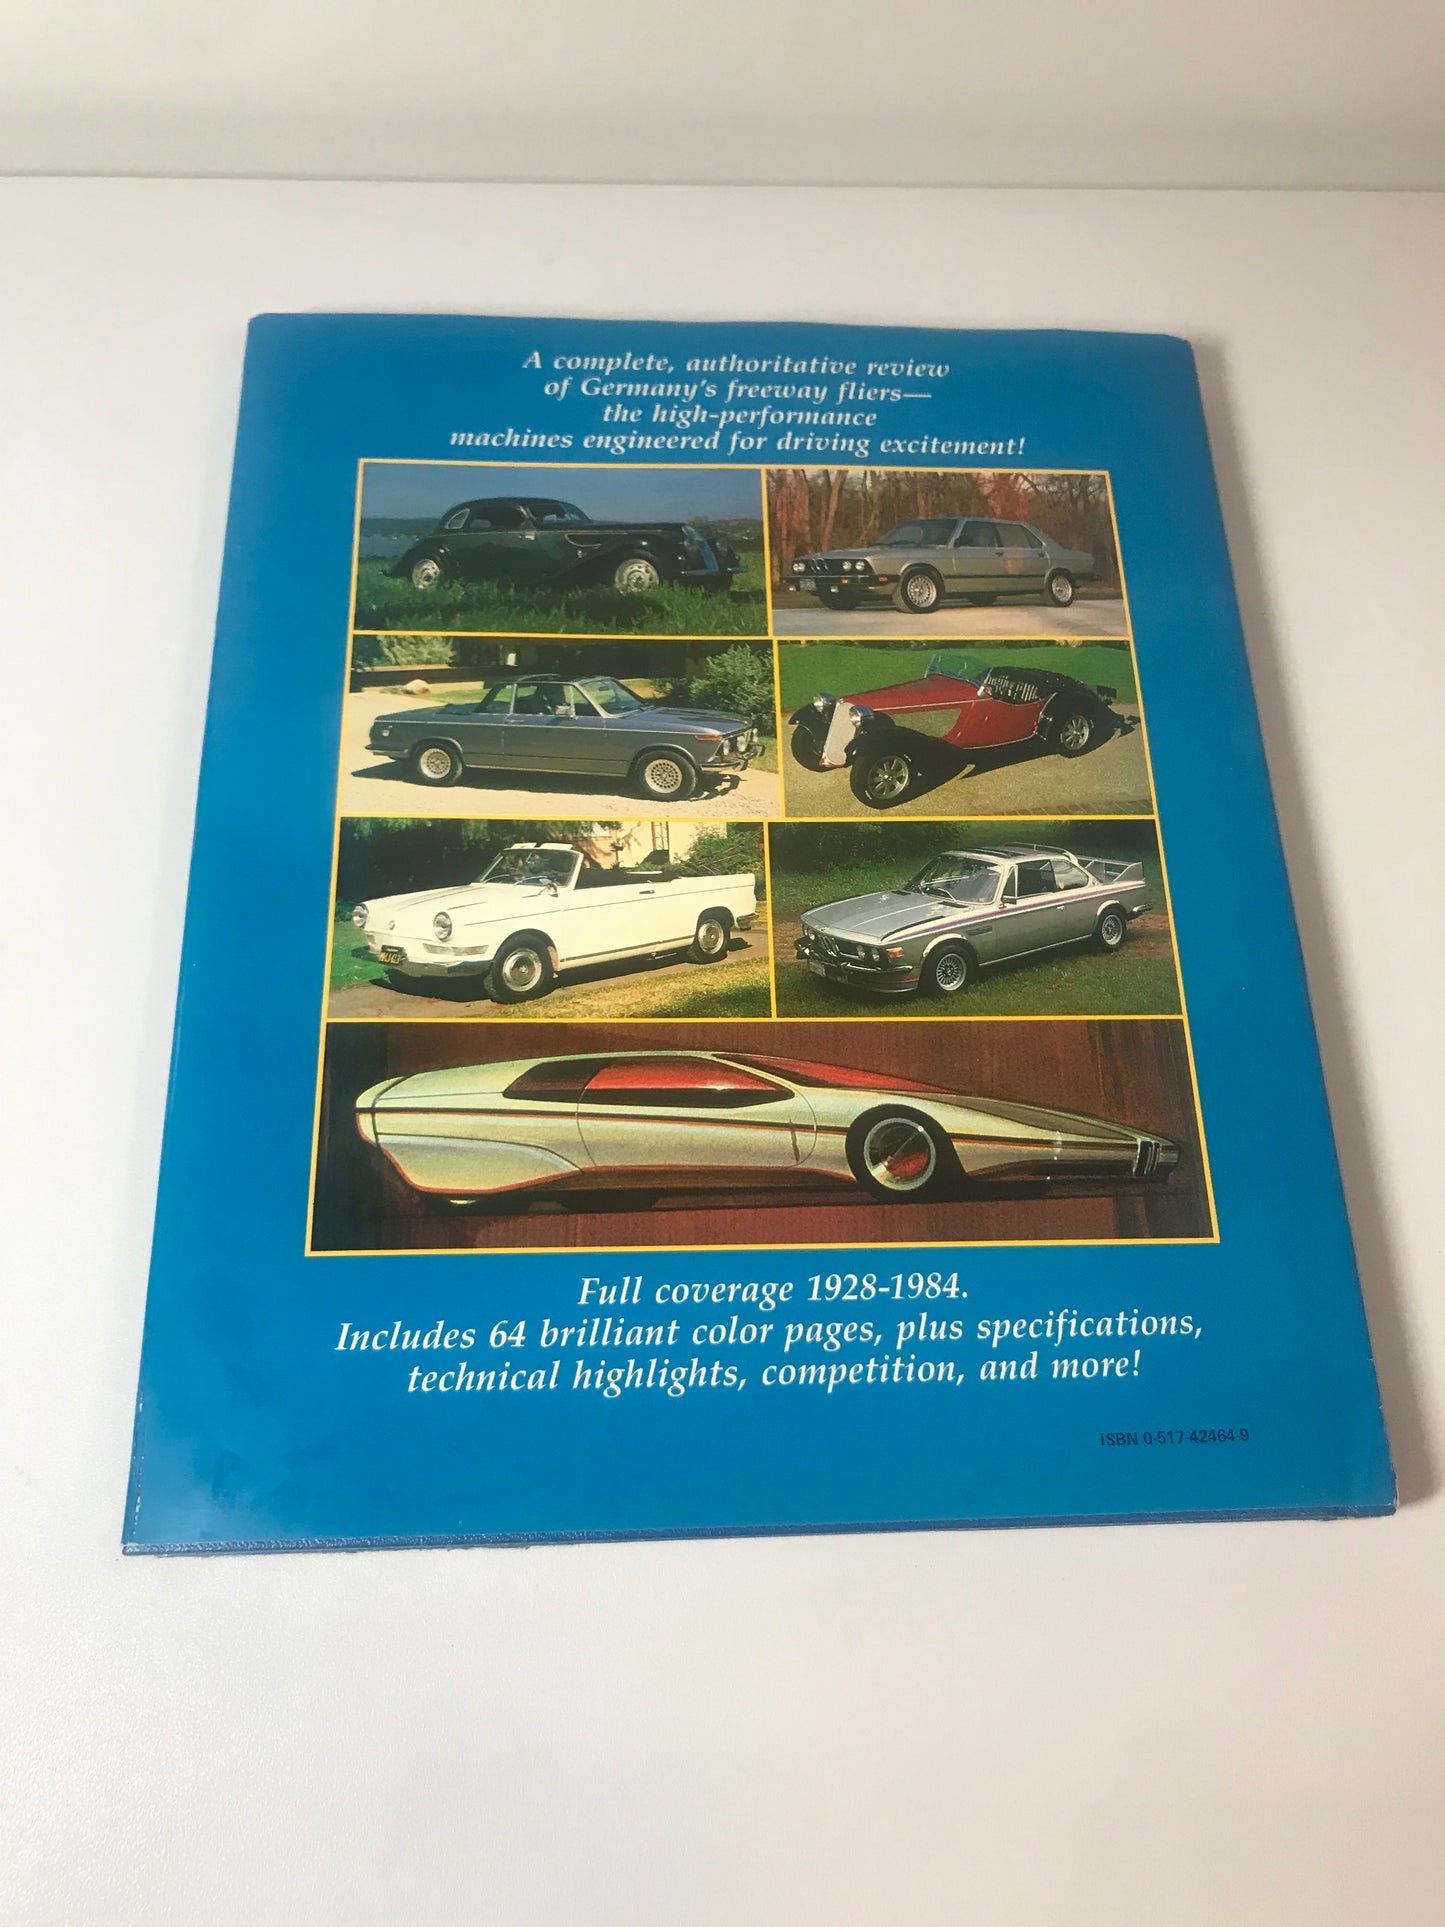 Vintage 1980s BMW Coffee Table Book